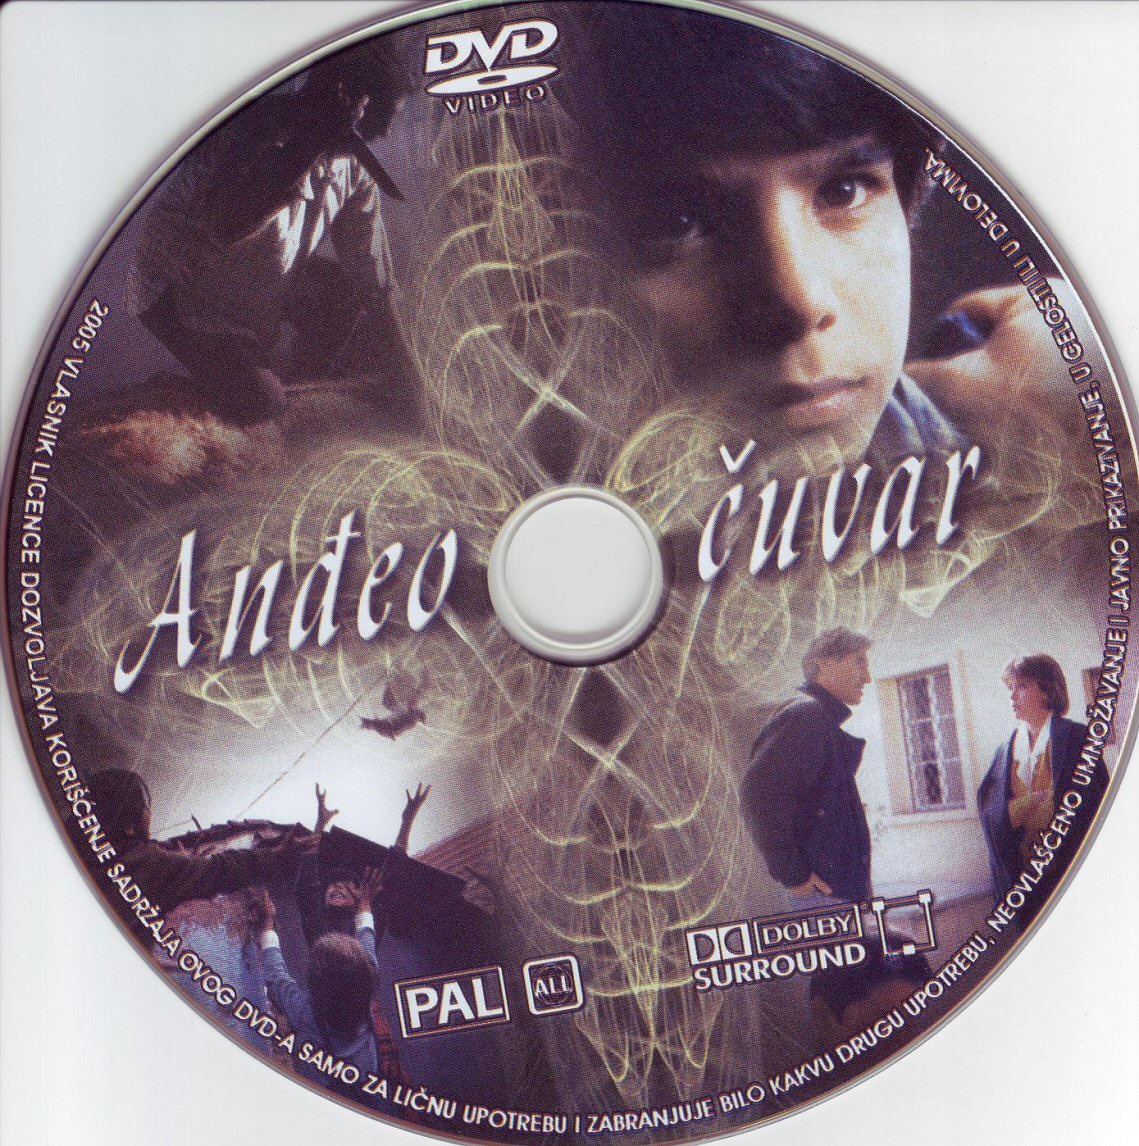 Click to view full size image -  DVD Cover - A - DVD - ANDEO CUVAR - CD - DVD - ANDEO CUVAR - CD.JPG